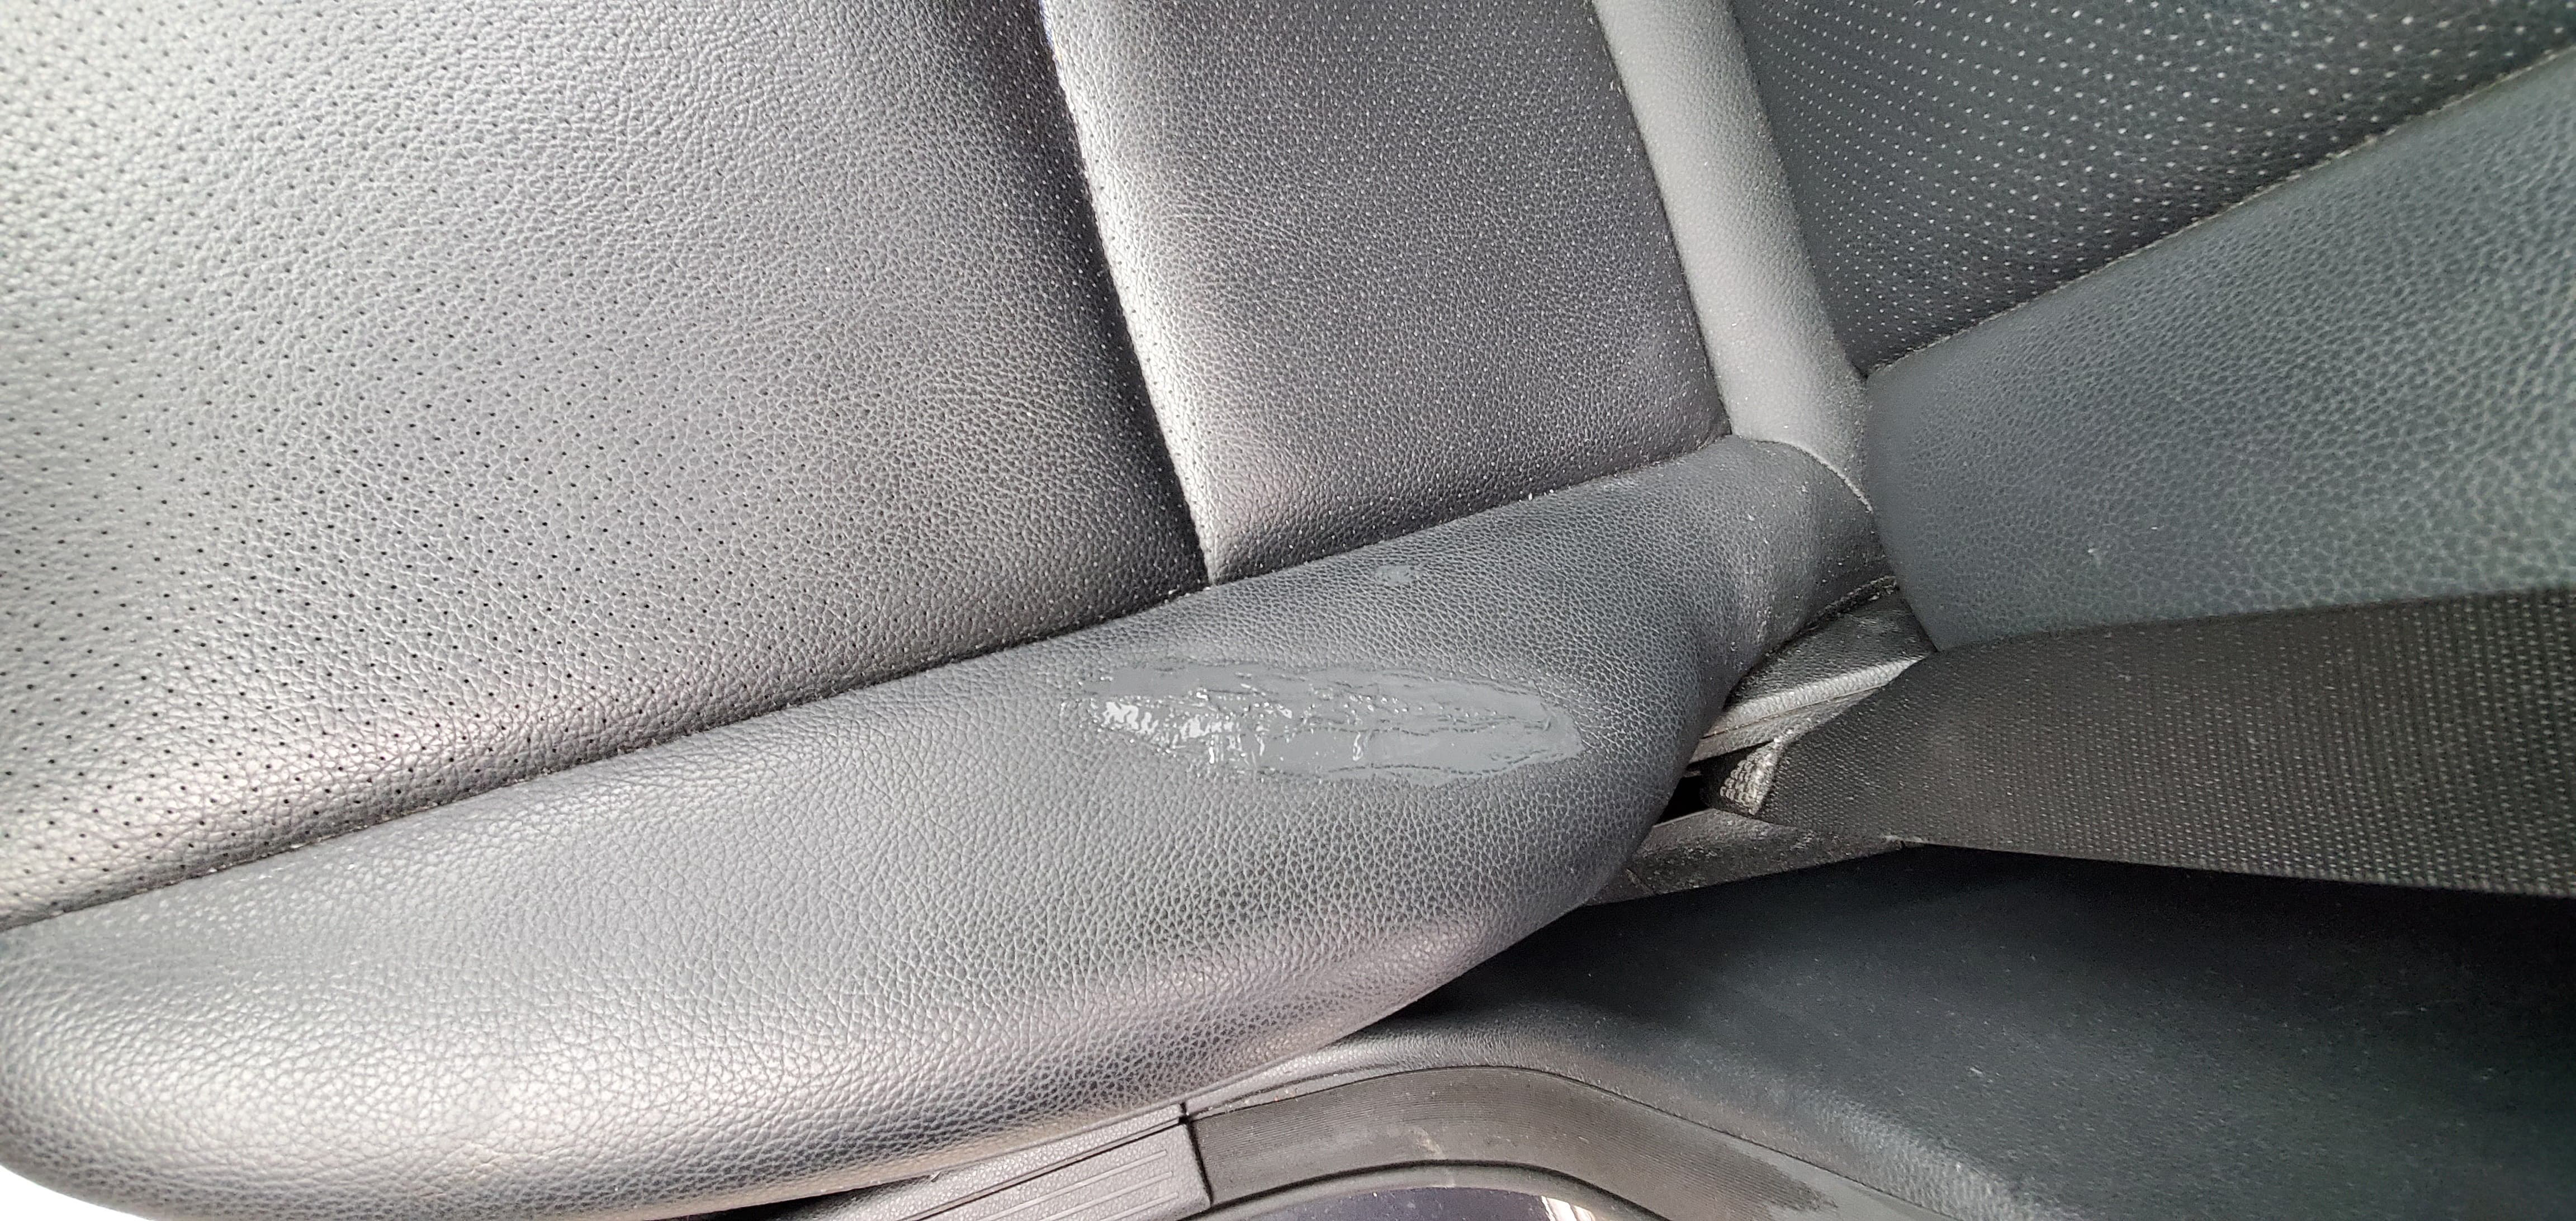 How To Repair A Leather Car Seat - Repair Small Rip In Leather Seat